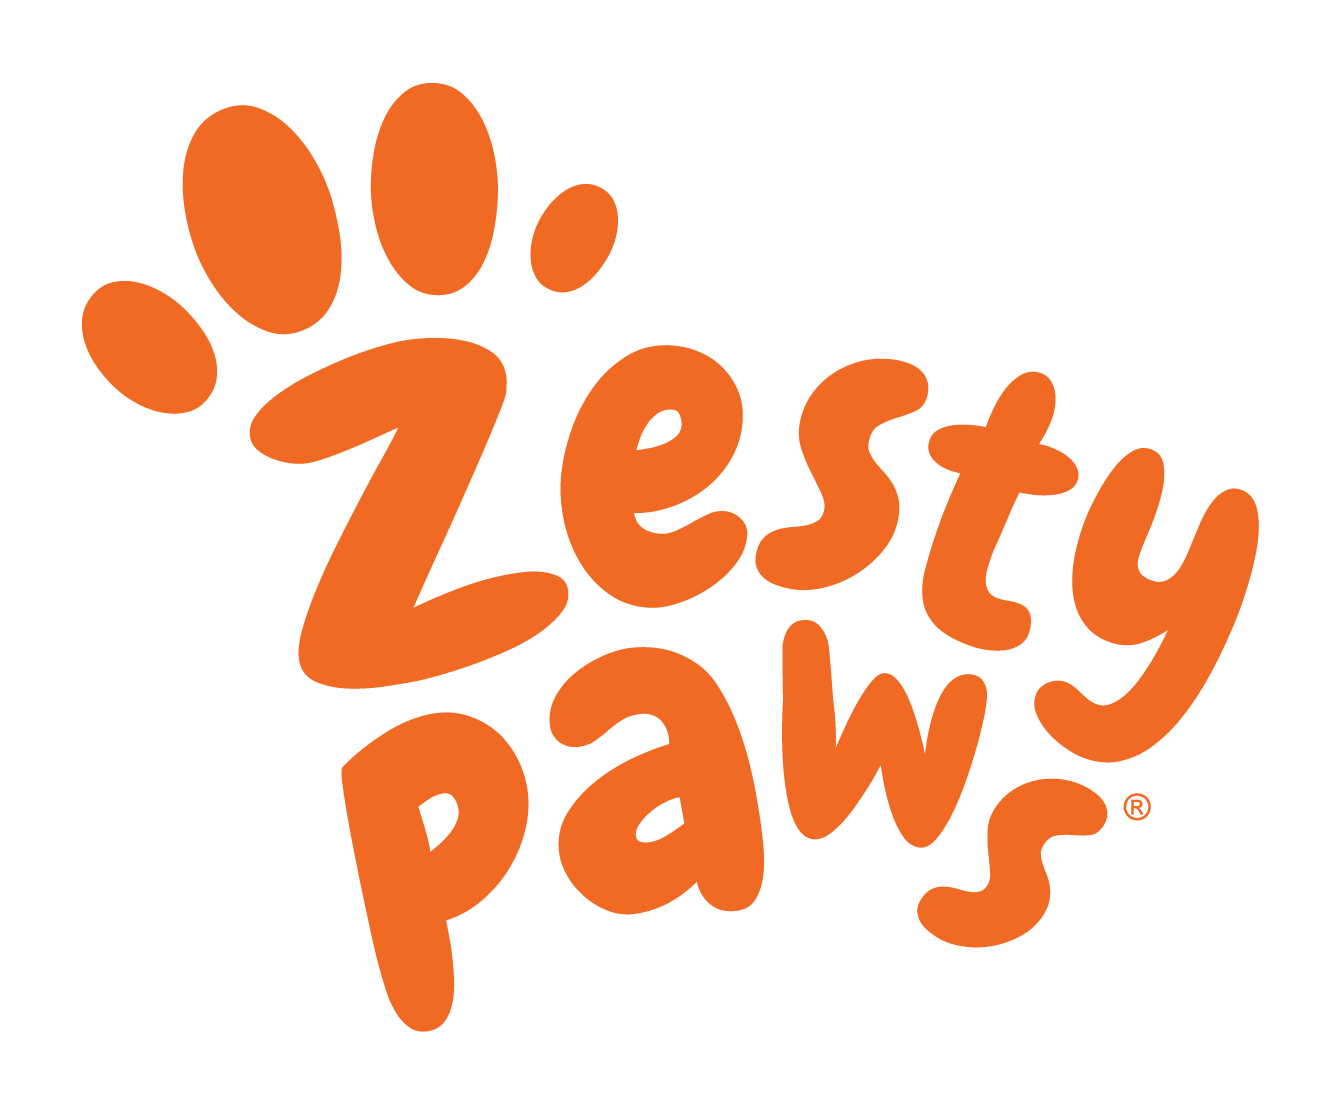 Zesty Paws® Cat and Dog Chews